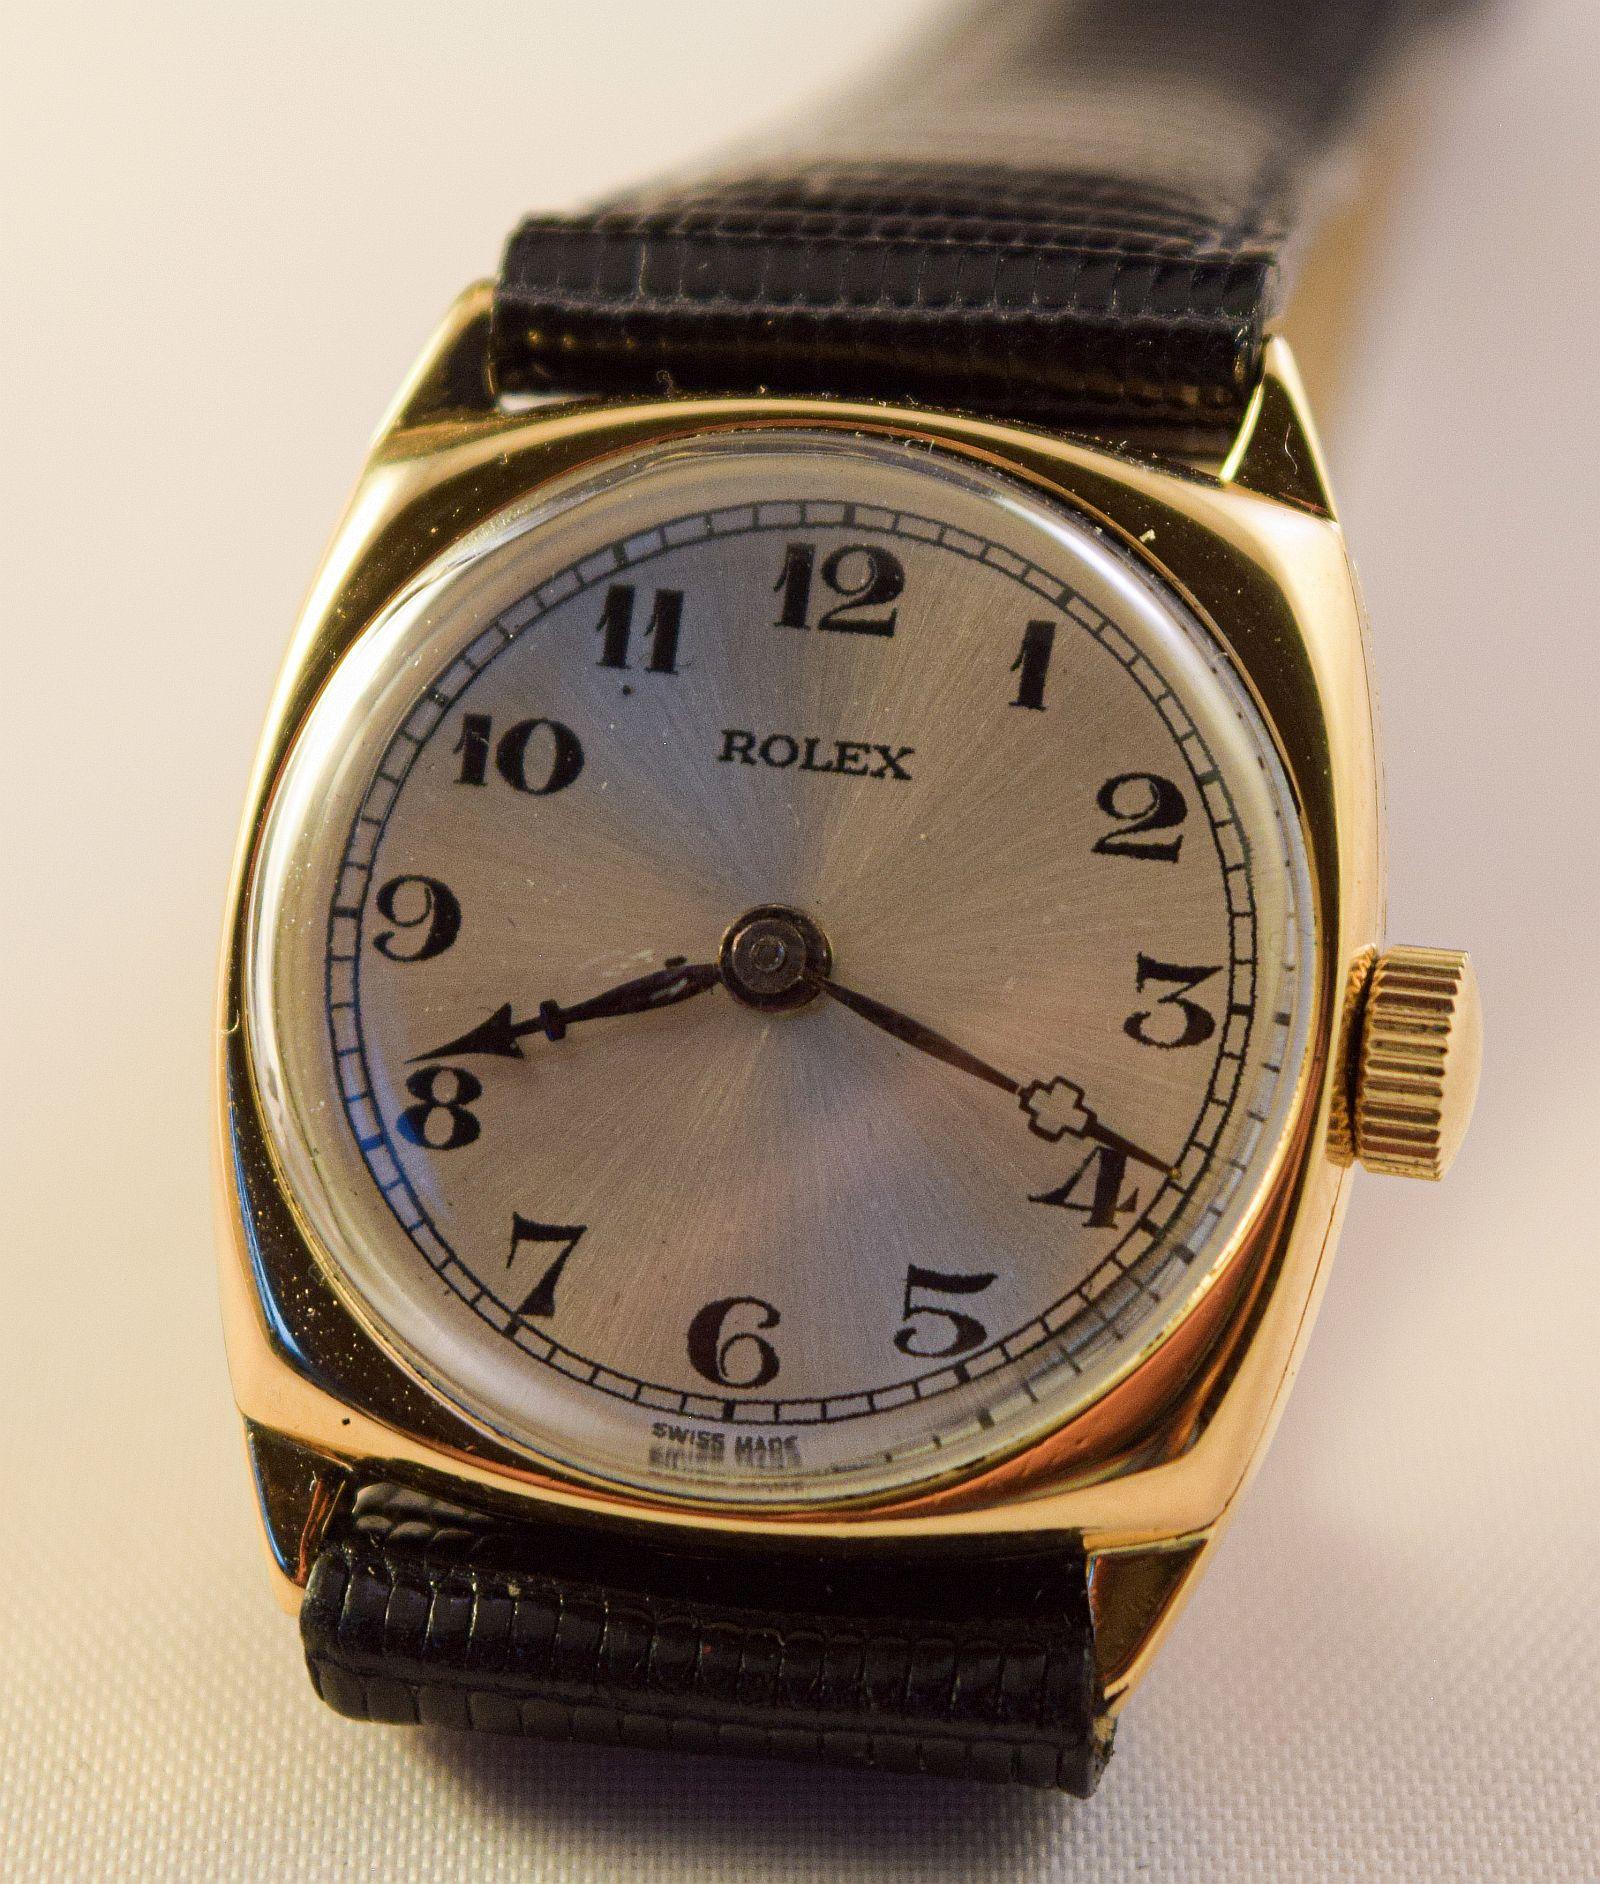 Rolex Vintage rare cushion shaped watch For Sale 5